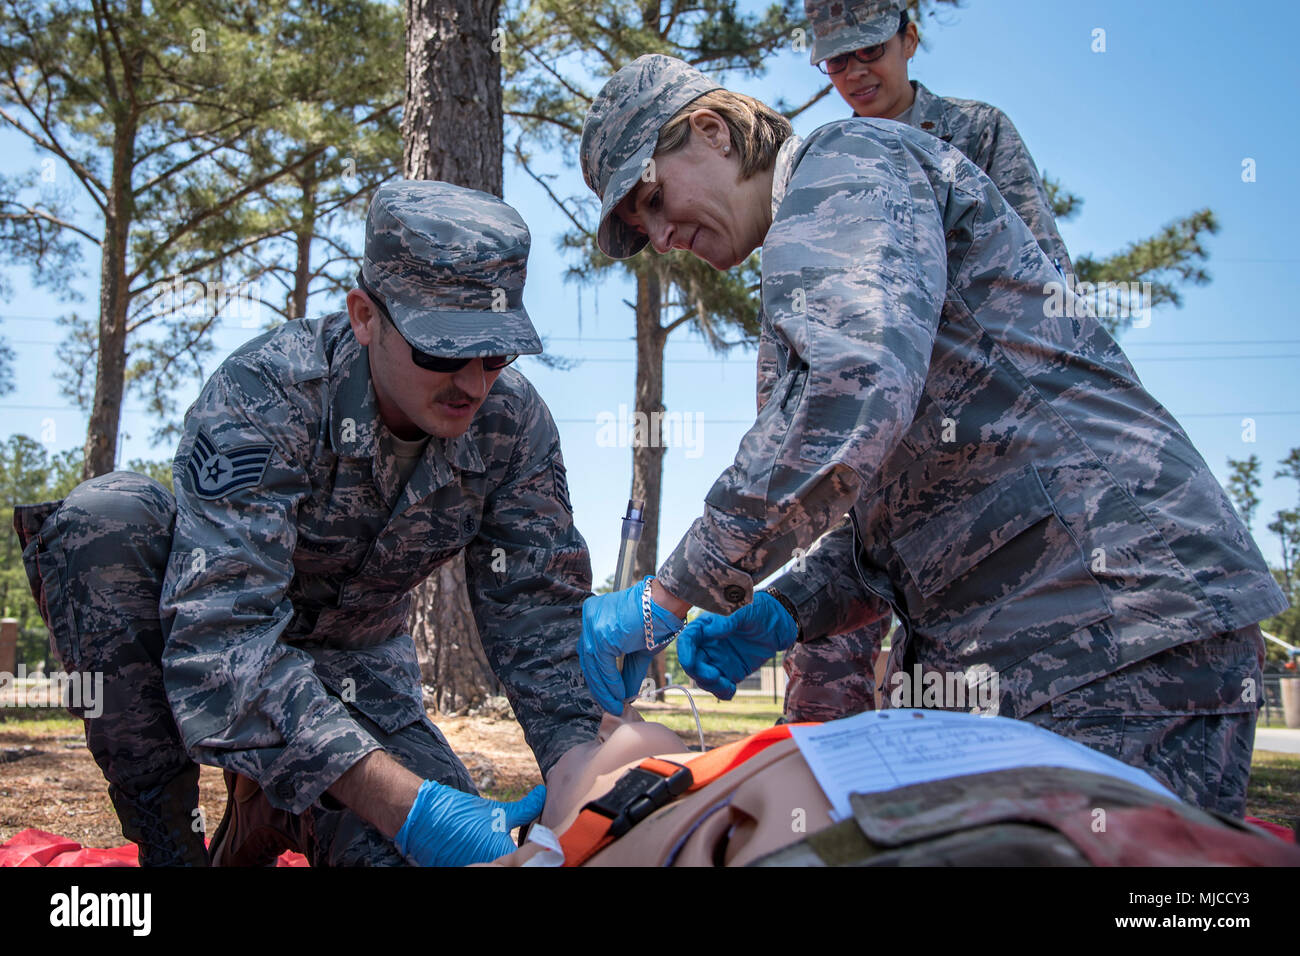 Col. Jennifer Short, right, 23d Wing commander, inserts a intubation tube into the mouth of a mannequin, April 30, 2018, at Moody Air Force Base, Ga. Short toured the 23d Medical Group (MDG) to gain a better understanding of their overall mission, capabilities, and comprehensive duties, and was able to experience the day-to-day operations of the various units within the 23d MDG, ranging from bioenvironmental to ambulatory care. (U.S. Air Force photo by Airman 1st Class Eugene Oliver) Stock Photo